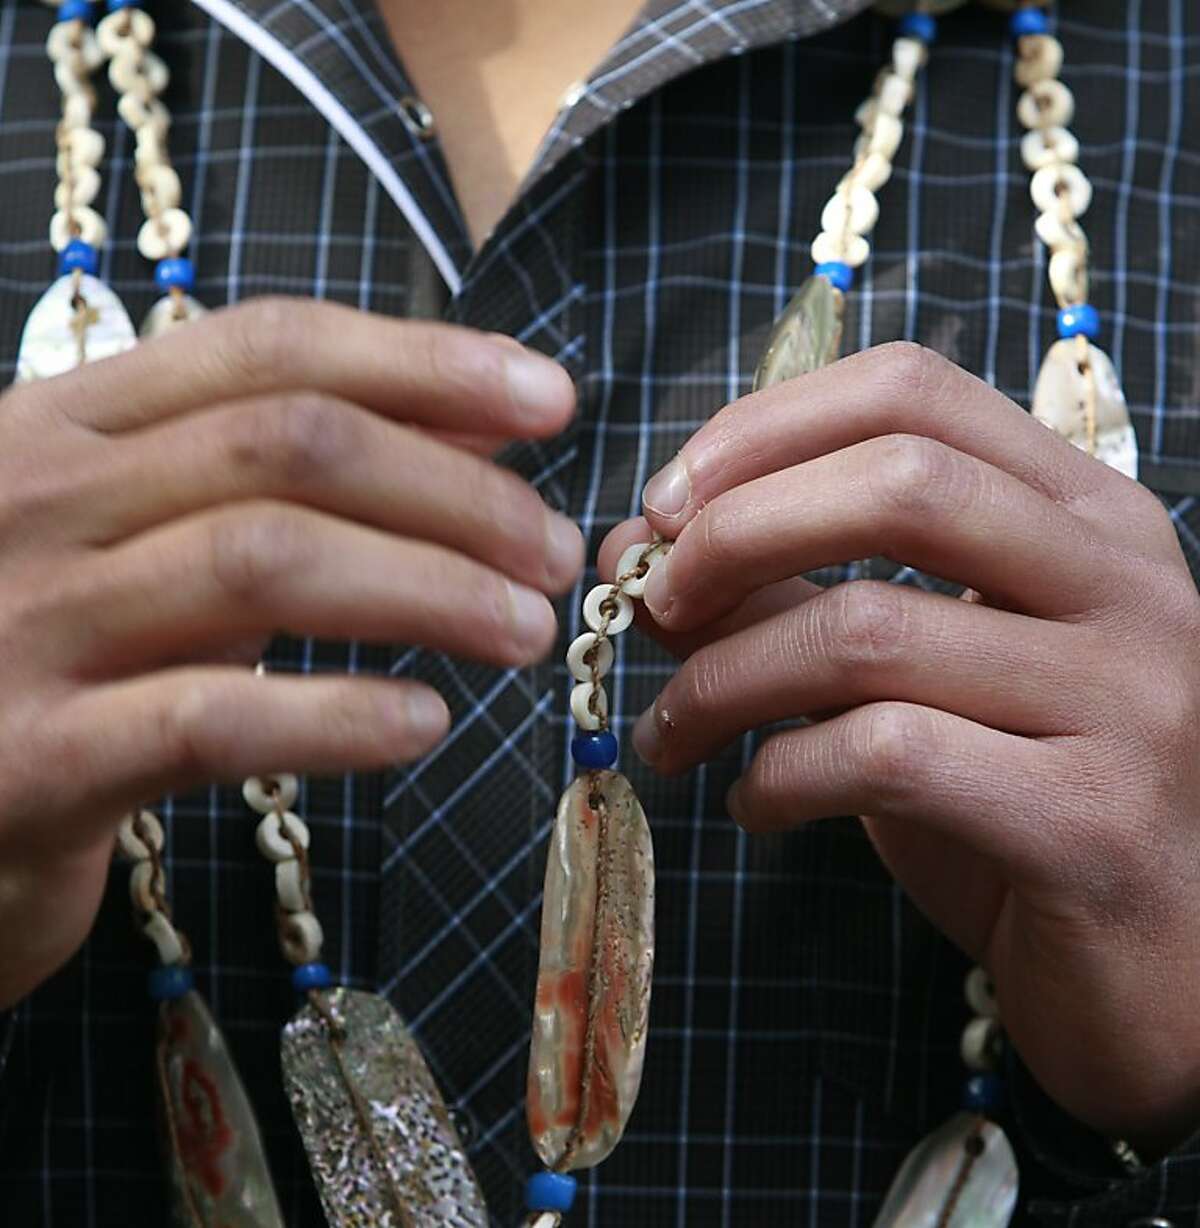 Vincent Medina wears a traditional necklace, handed down from Ohlone ancestors, while leading a tour of Mission Dolores for students from Oakland's Hillcrest Elementary School in San Francisco, Calif. on Thursday, Nov. 15, 2012. Medina is hoping to revive the Cochoenyo language that was spoken by his Ohlone ancestors.